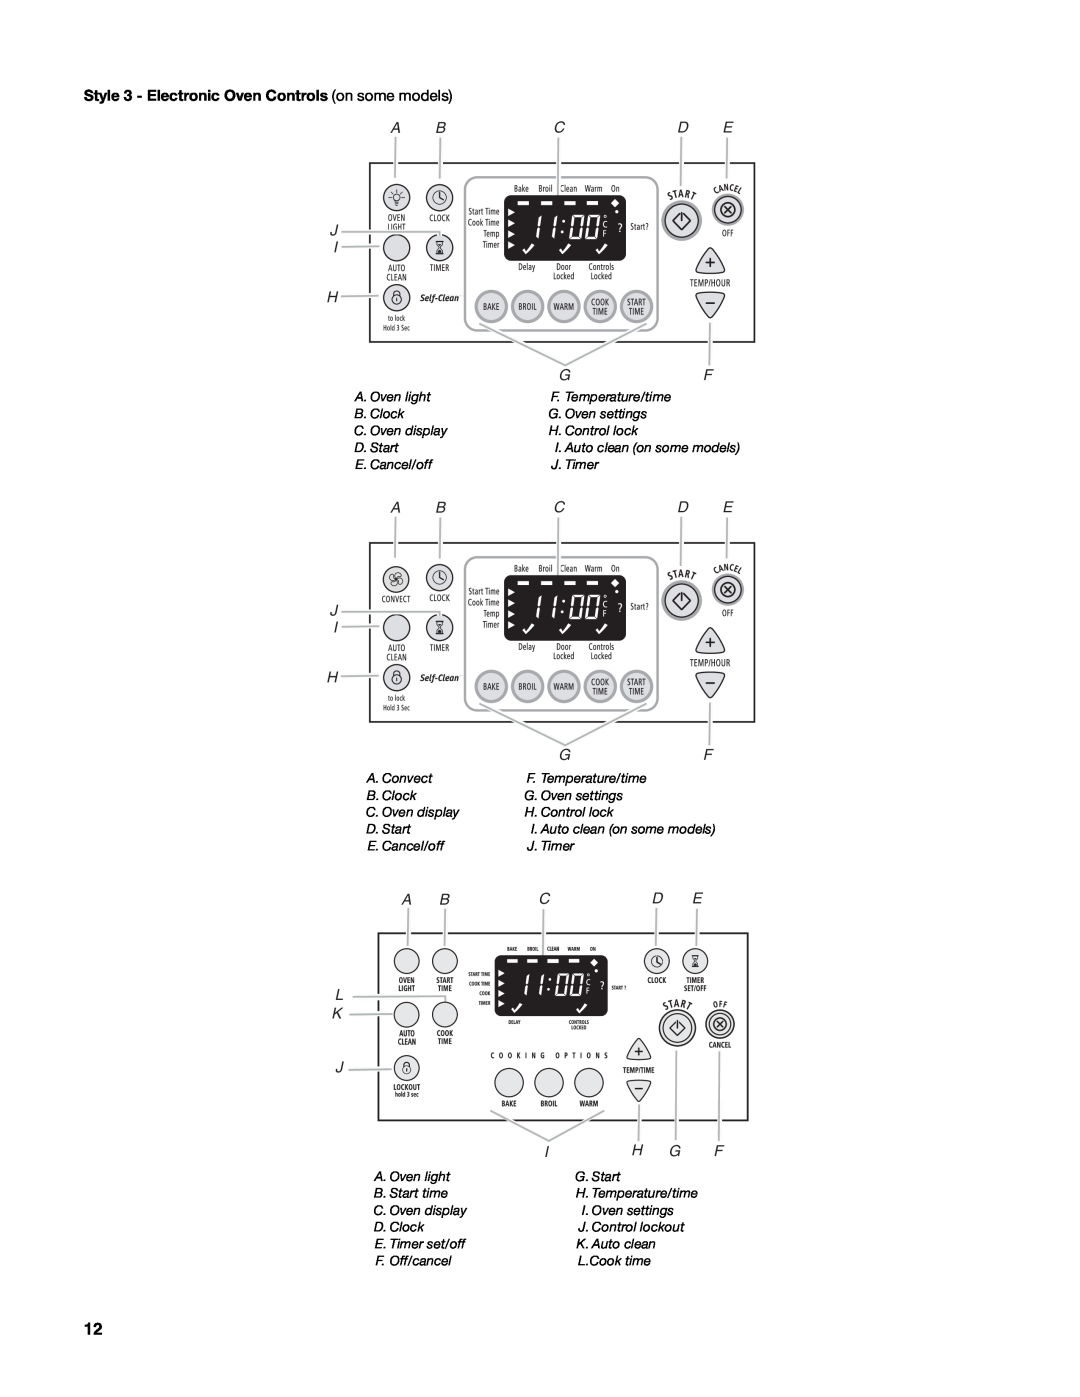 Whirlpool W10162205A manual Style 3 - Electronic Oven Controls on some models, A Bcd E J I H, L K J 